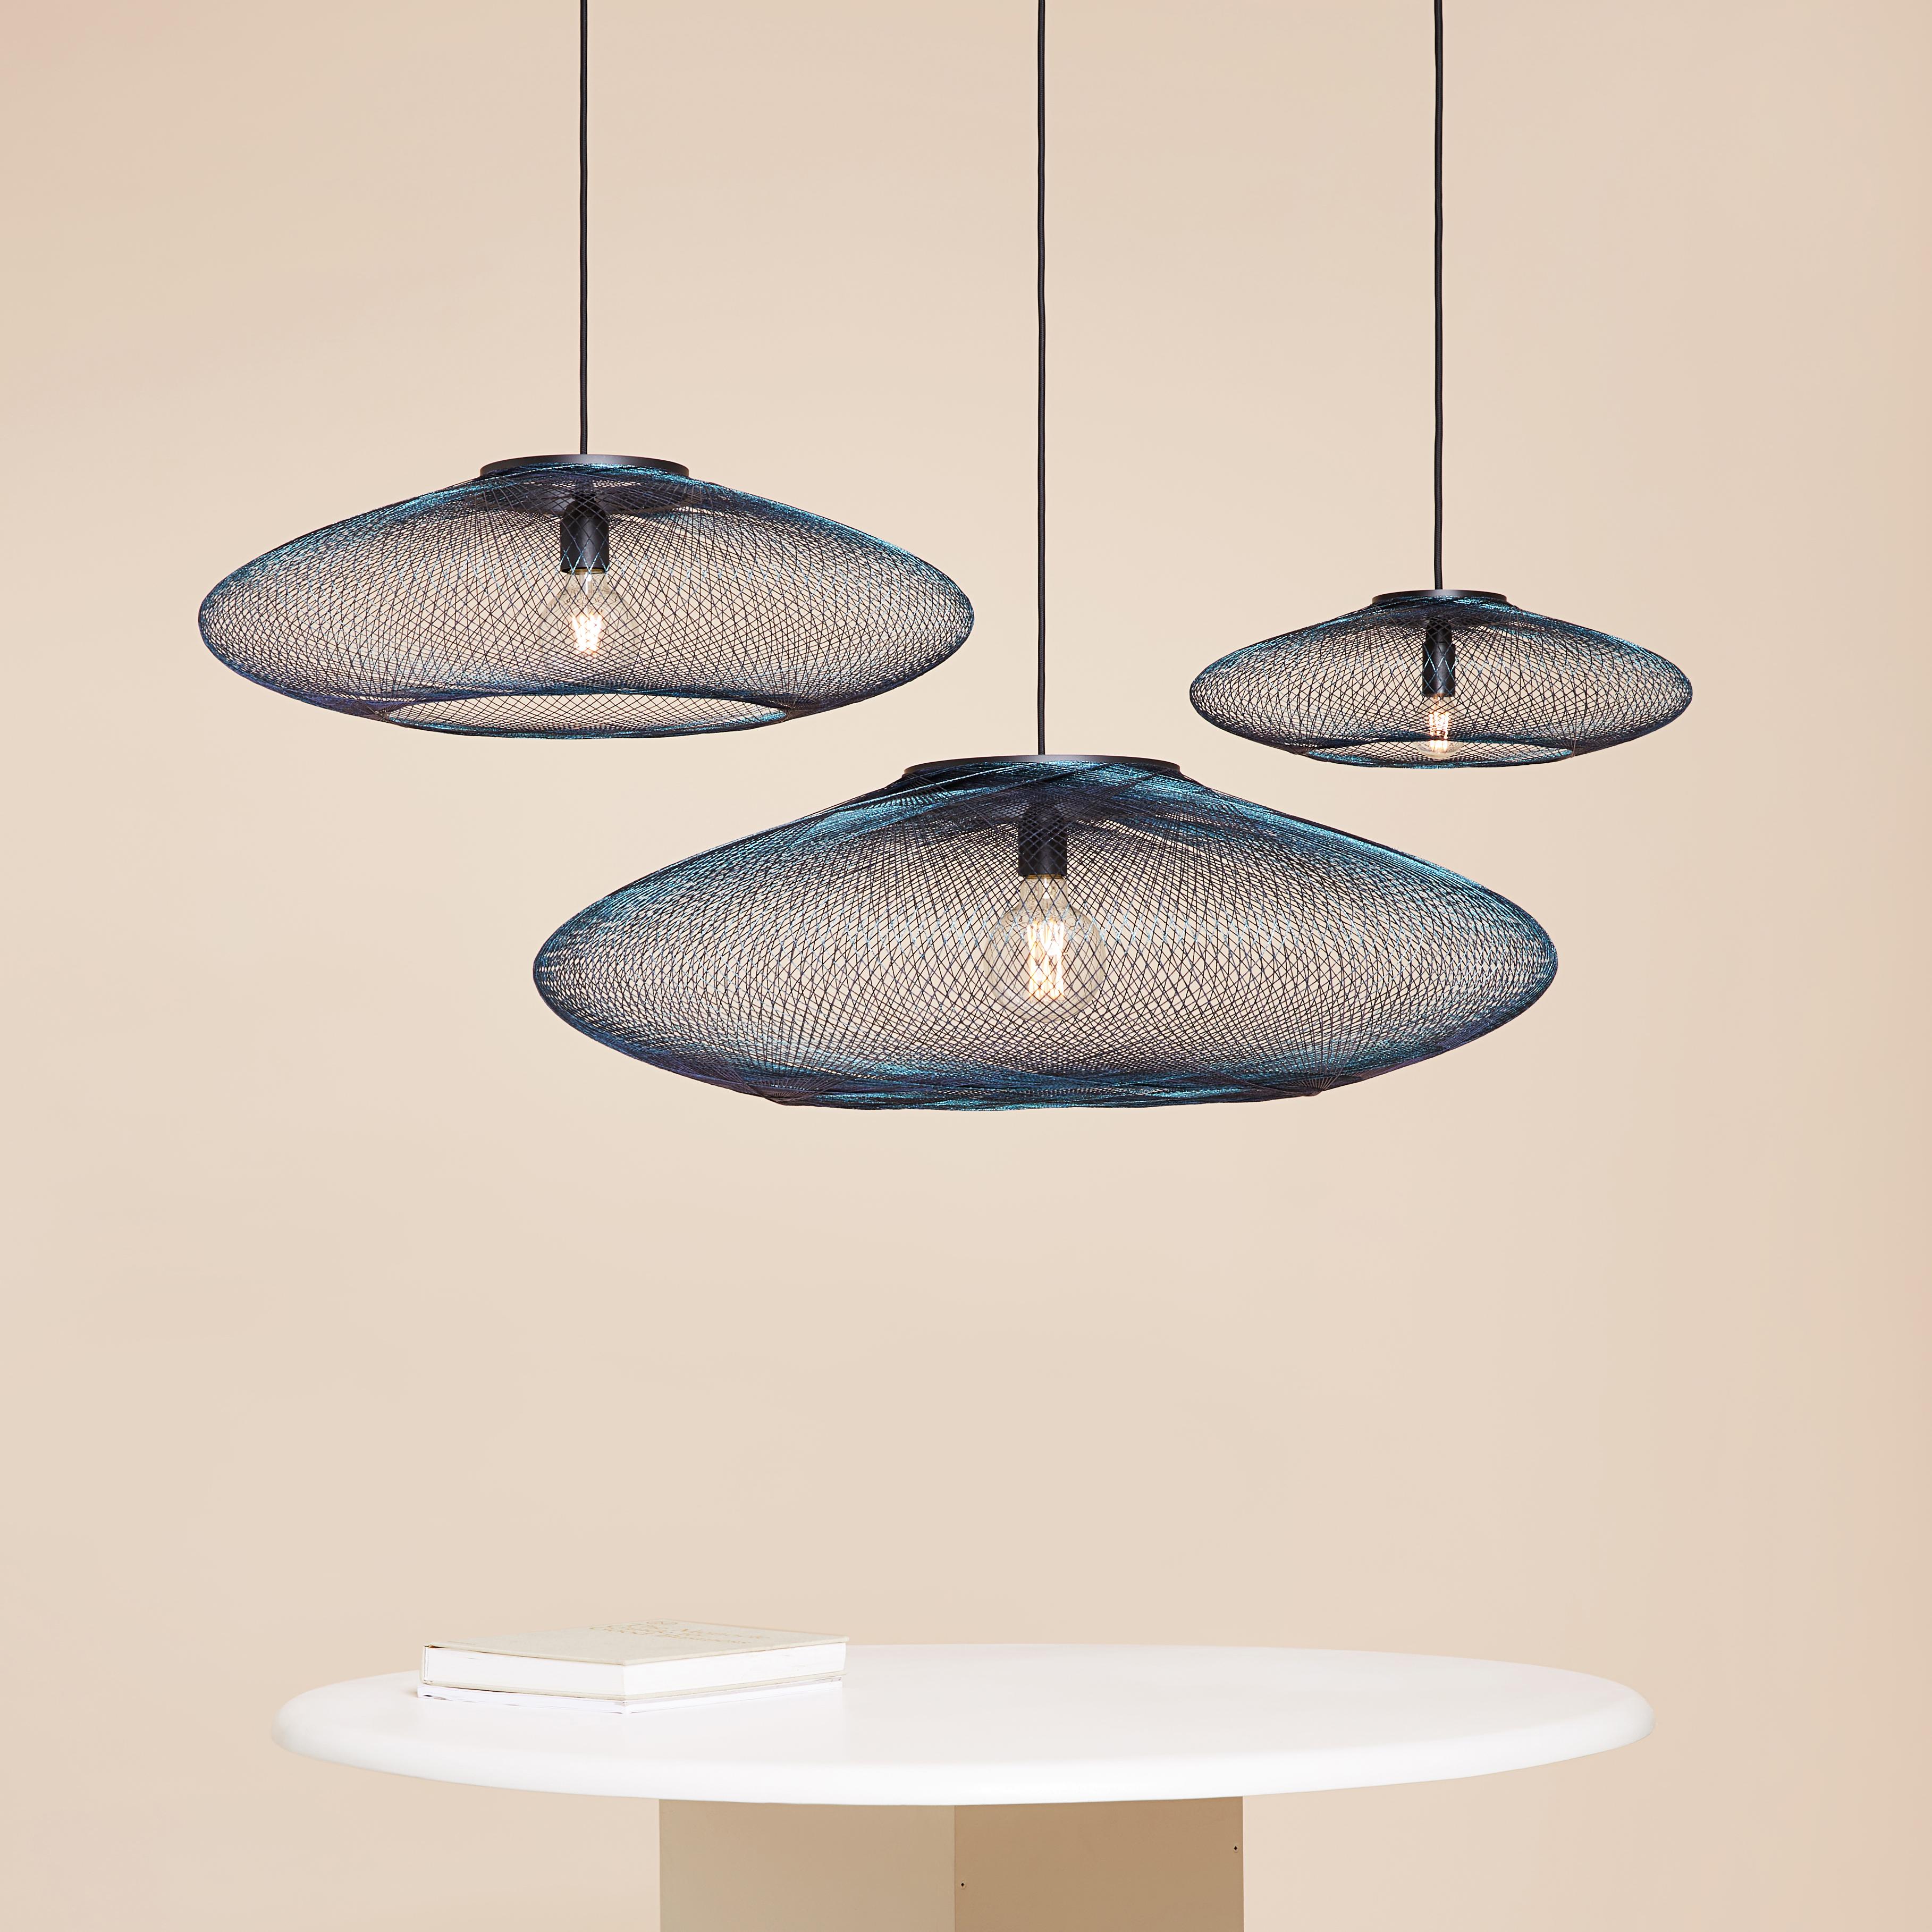 Small Iridescent UFO pendant lamp by Atelier Robotiq
Dimensions: D 40 x H 12 cm
Materials: Resin-impregnated industrial fiber, black coated stainless steel.
Available in different colors, 3 sizes, and in Full pattern or Open pattern.

All our